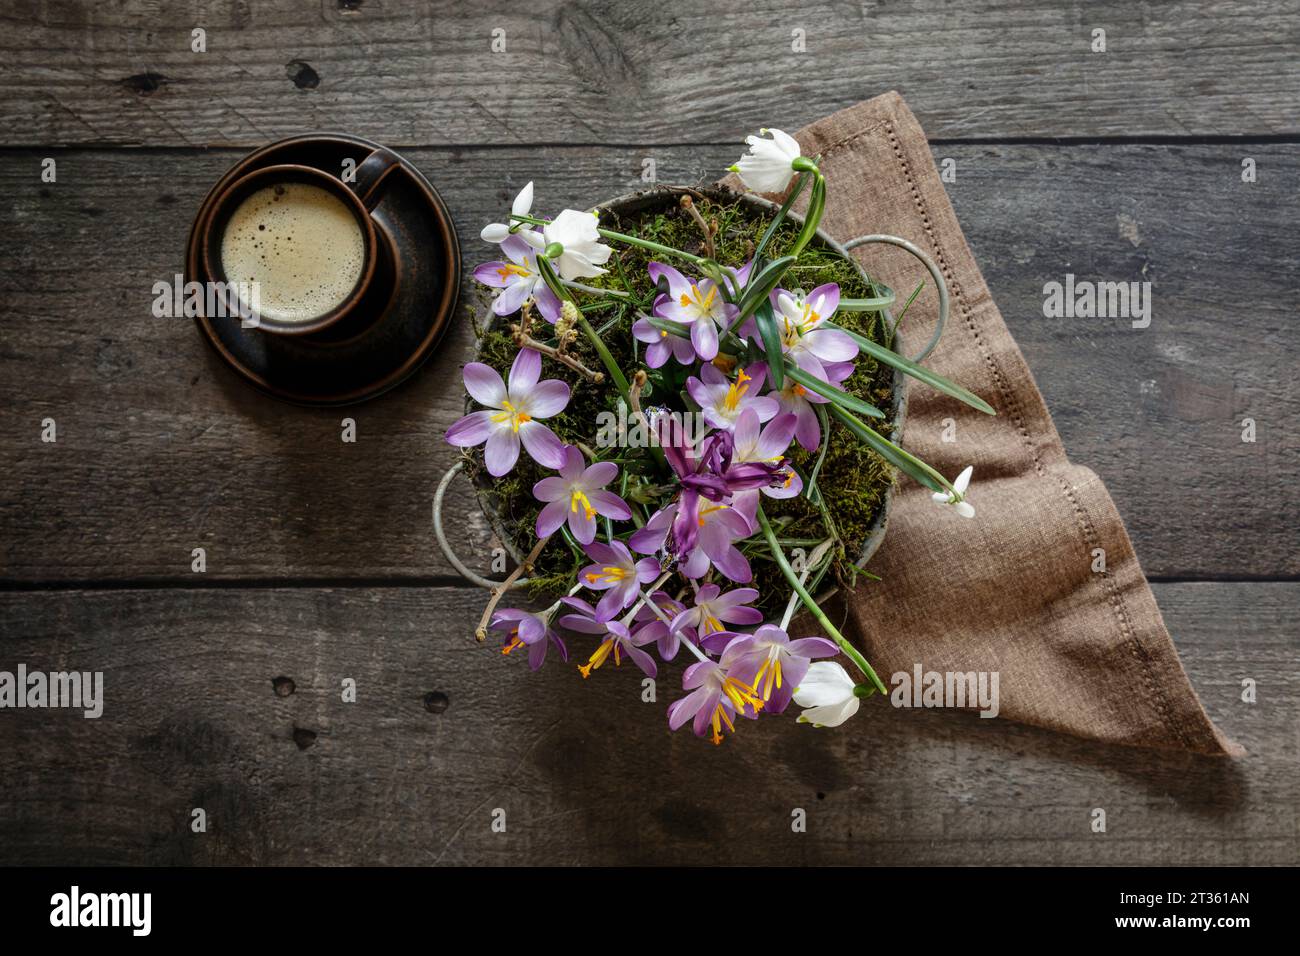 Cup of coffee and springtime flowers in metal bucket standing on wooden table Stock Photo